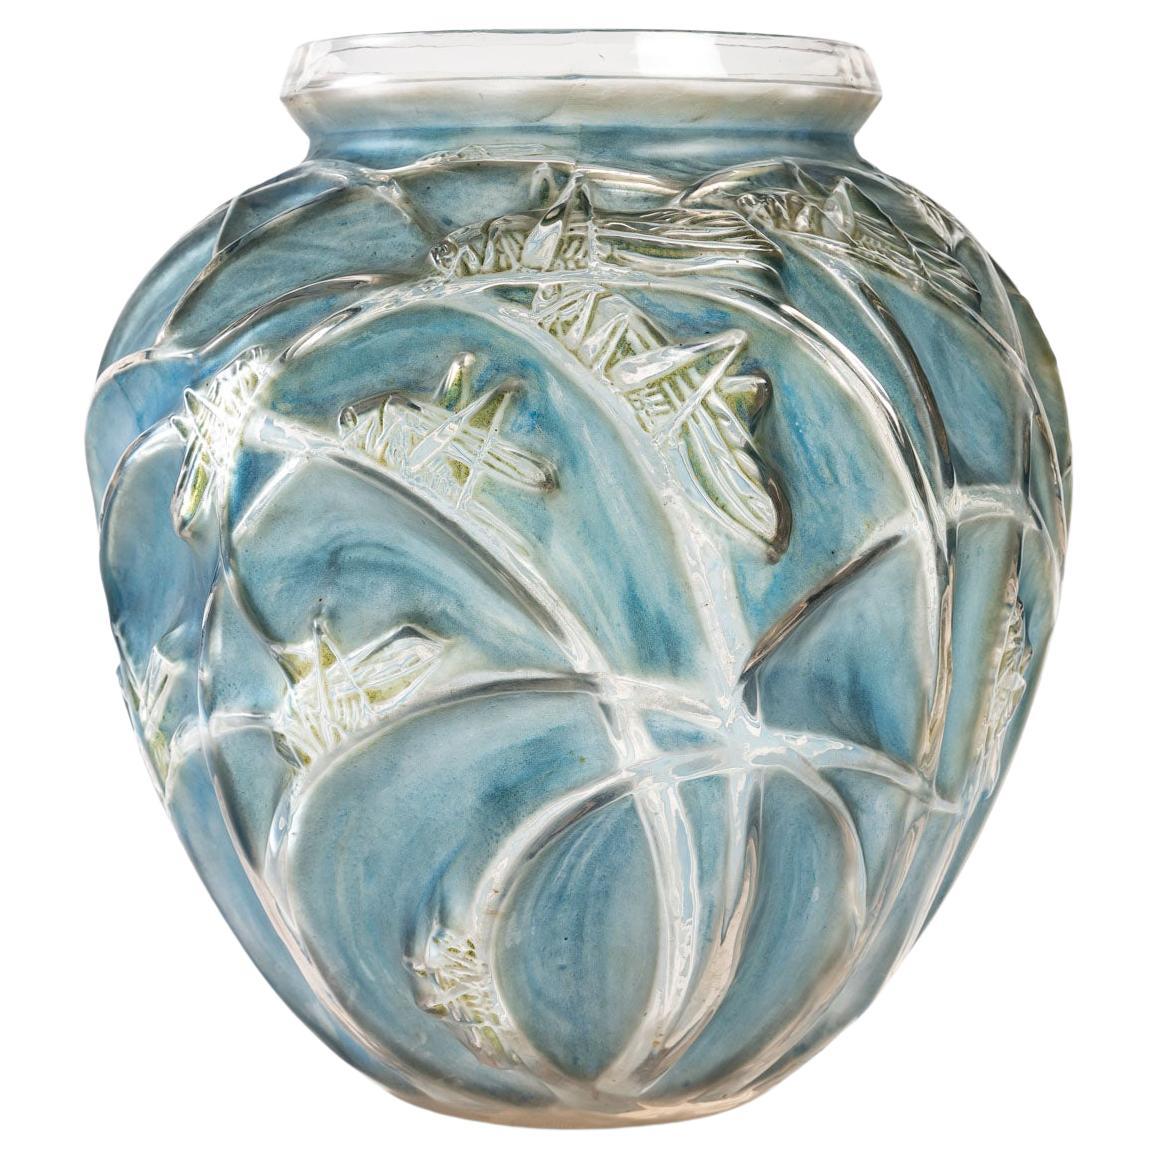 1912 René Lalique Sauterelles Vase Glass with Blue and Green Patina Grasshoppers